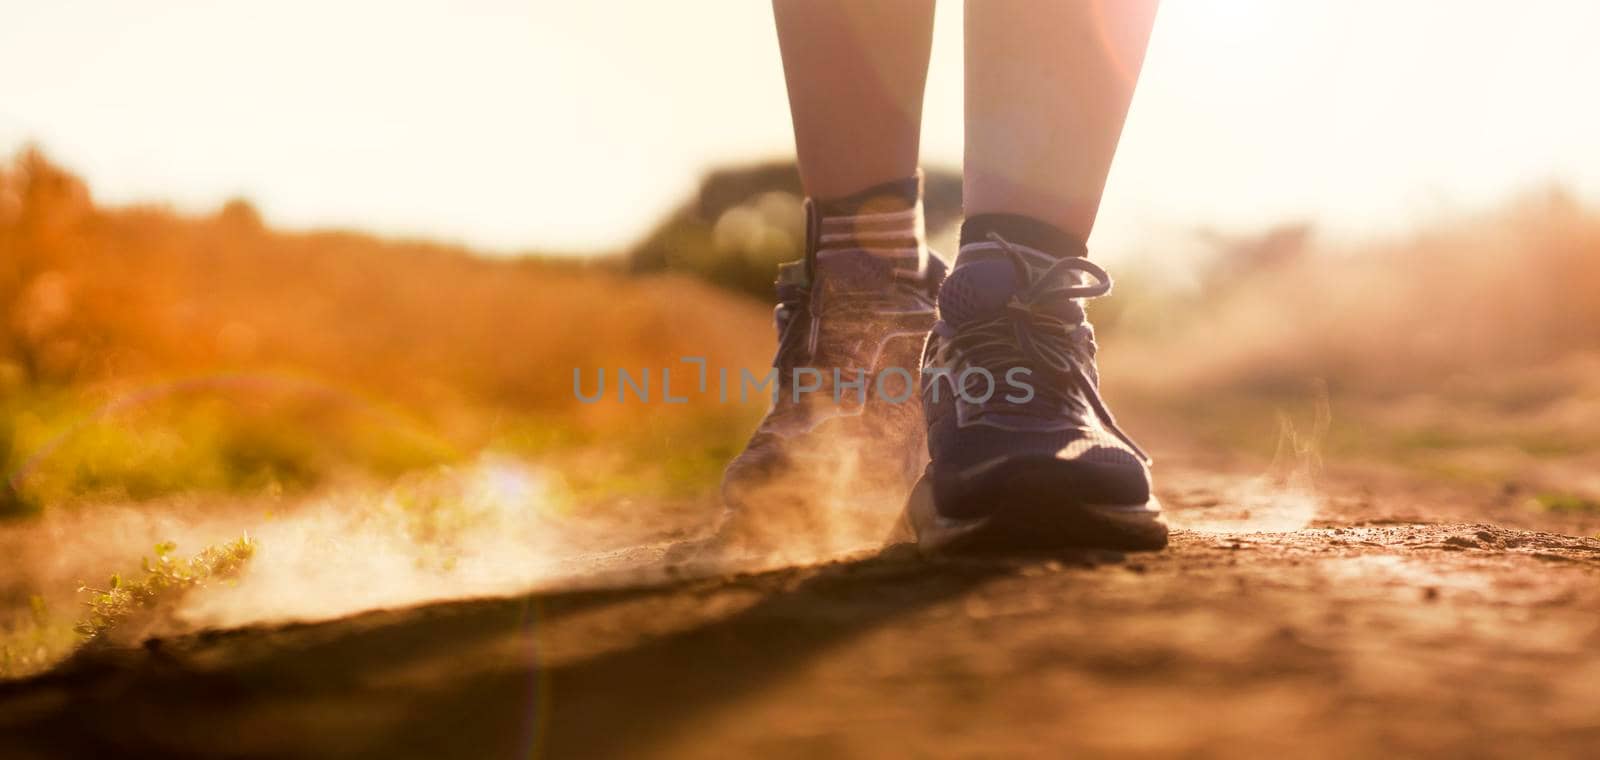 Female athletic legs in sneakers at sunset during outdoor jogging at sunset. A young girl warms up, she is engaged in trail running, view on her legs and clouds of dust close-up.